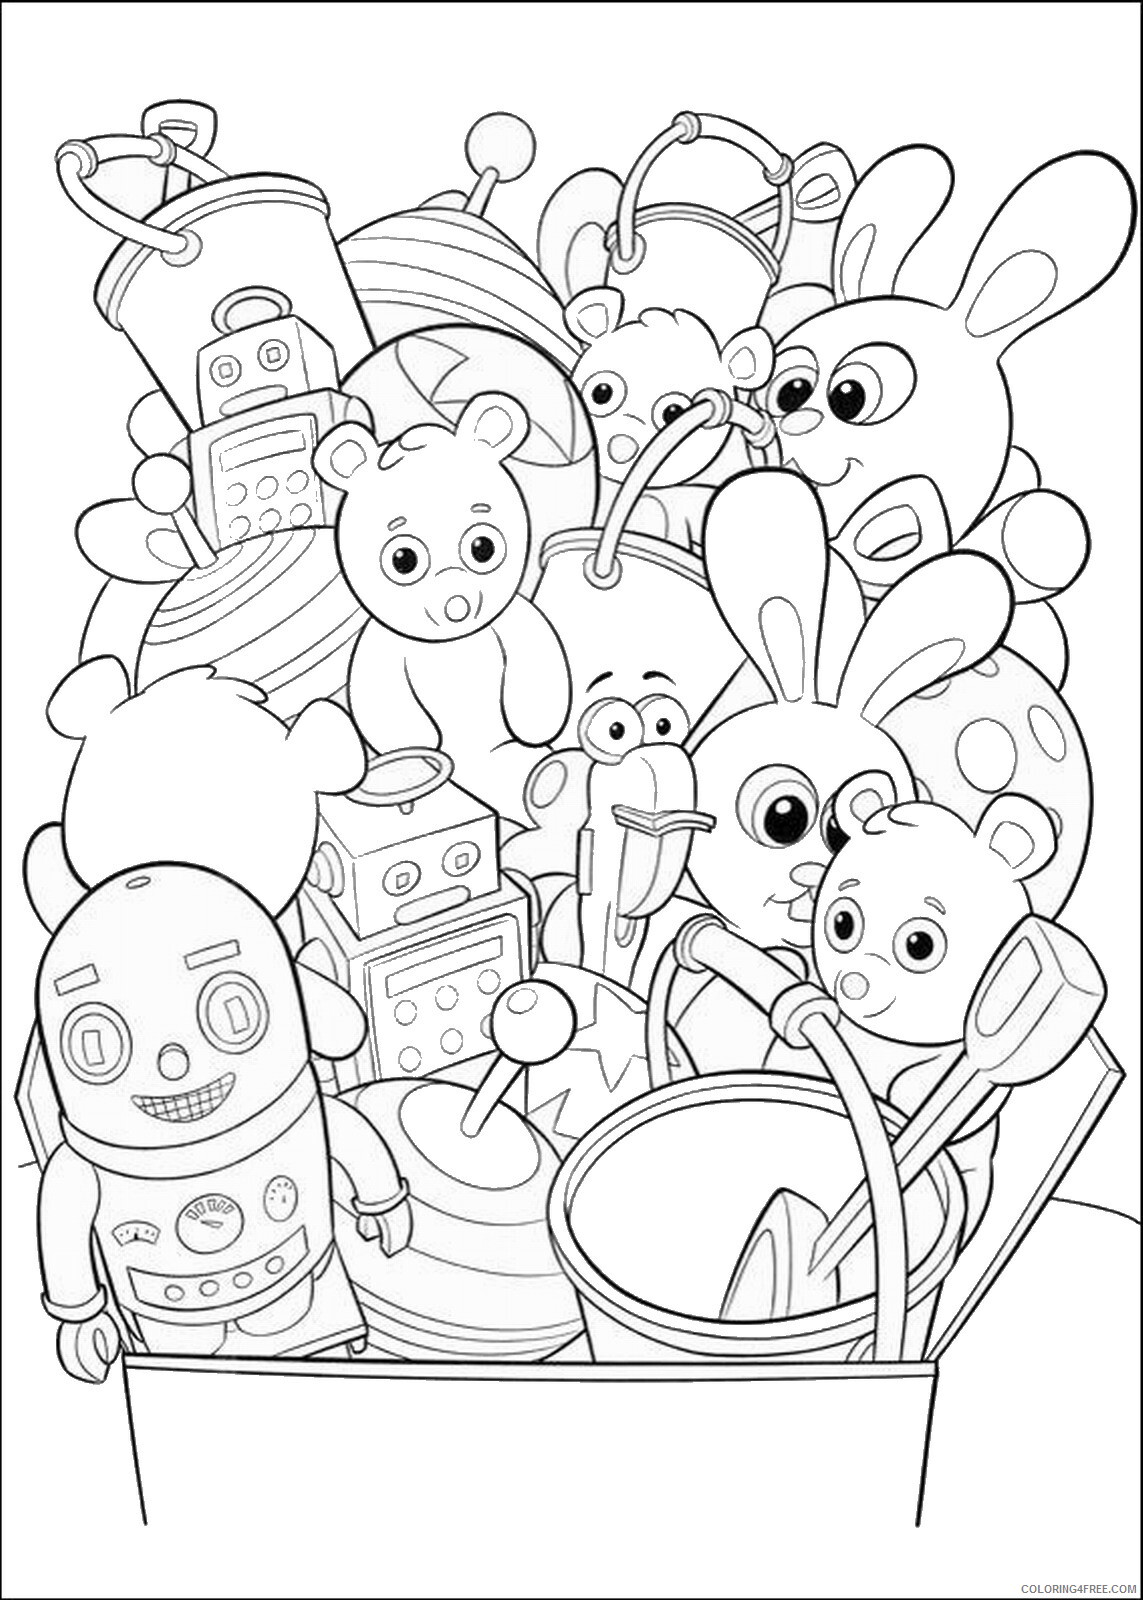 Handy Manny Coloring Pages TV Film handy_manny_coloring30 Printable 2020 03405 Coloring4free